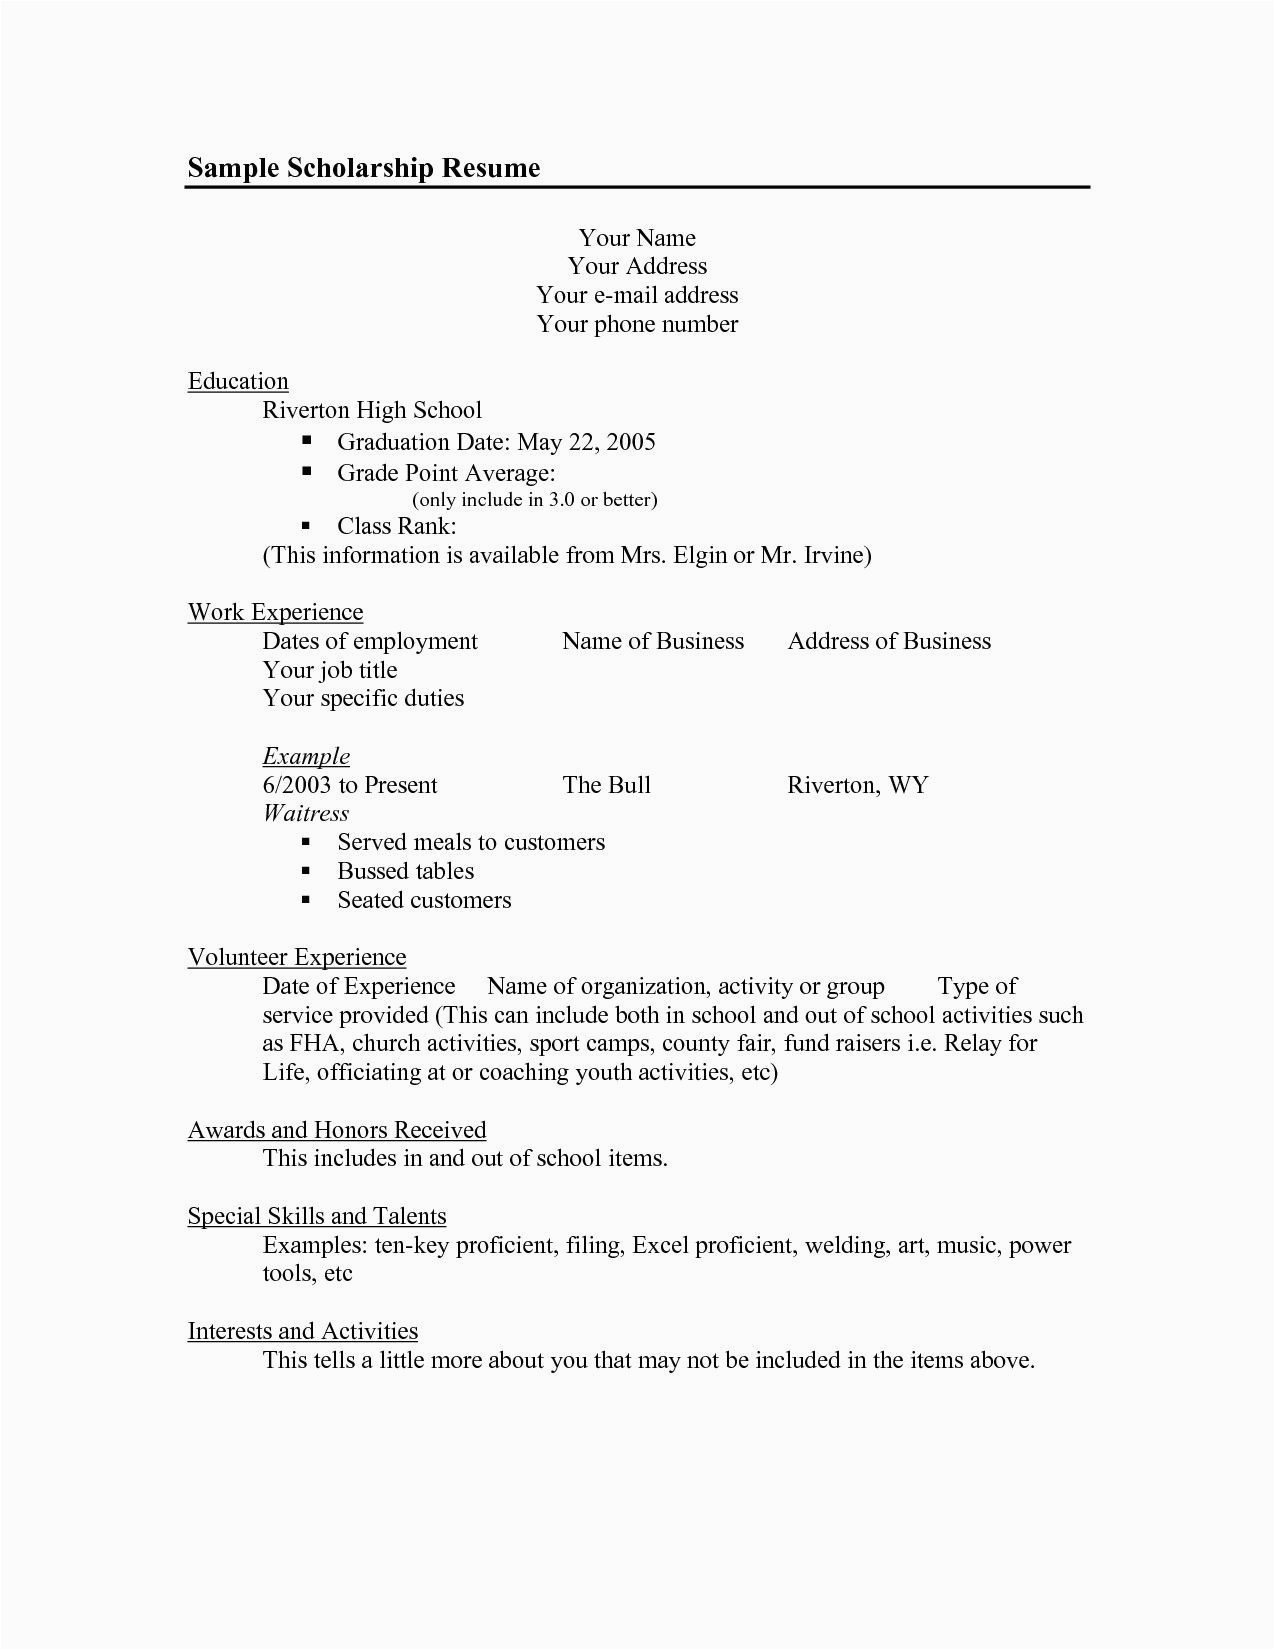 Sample College Graduate Spelling Proofreading Resume Personal Statement Sample for Scholarship